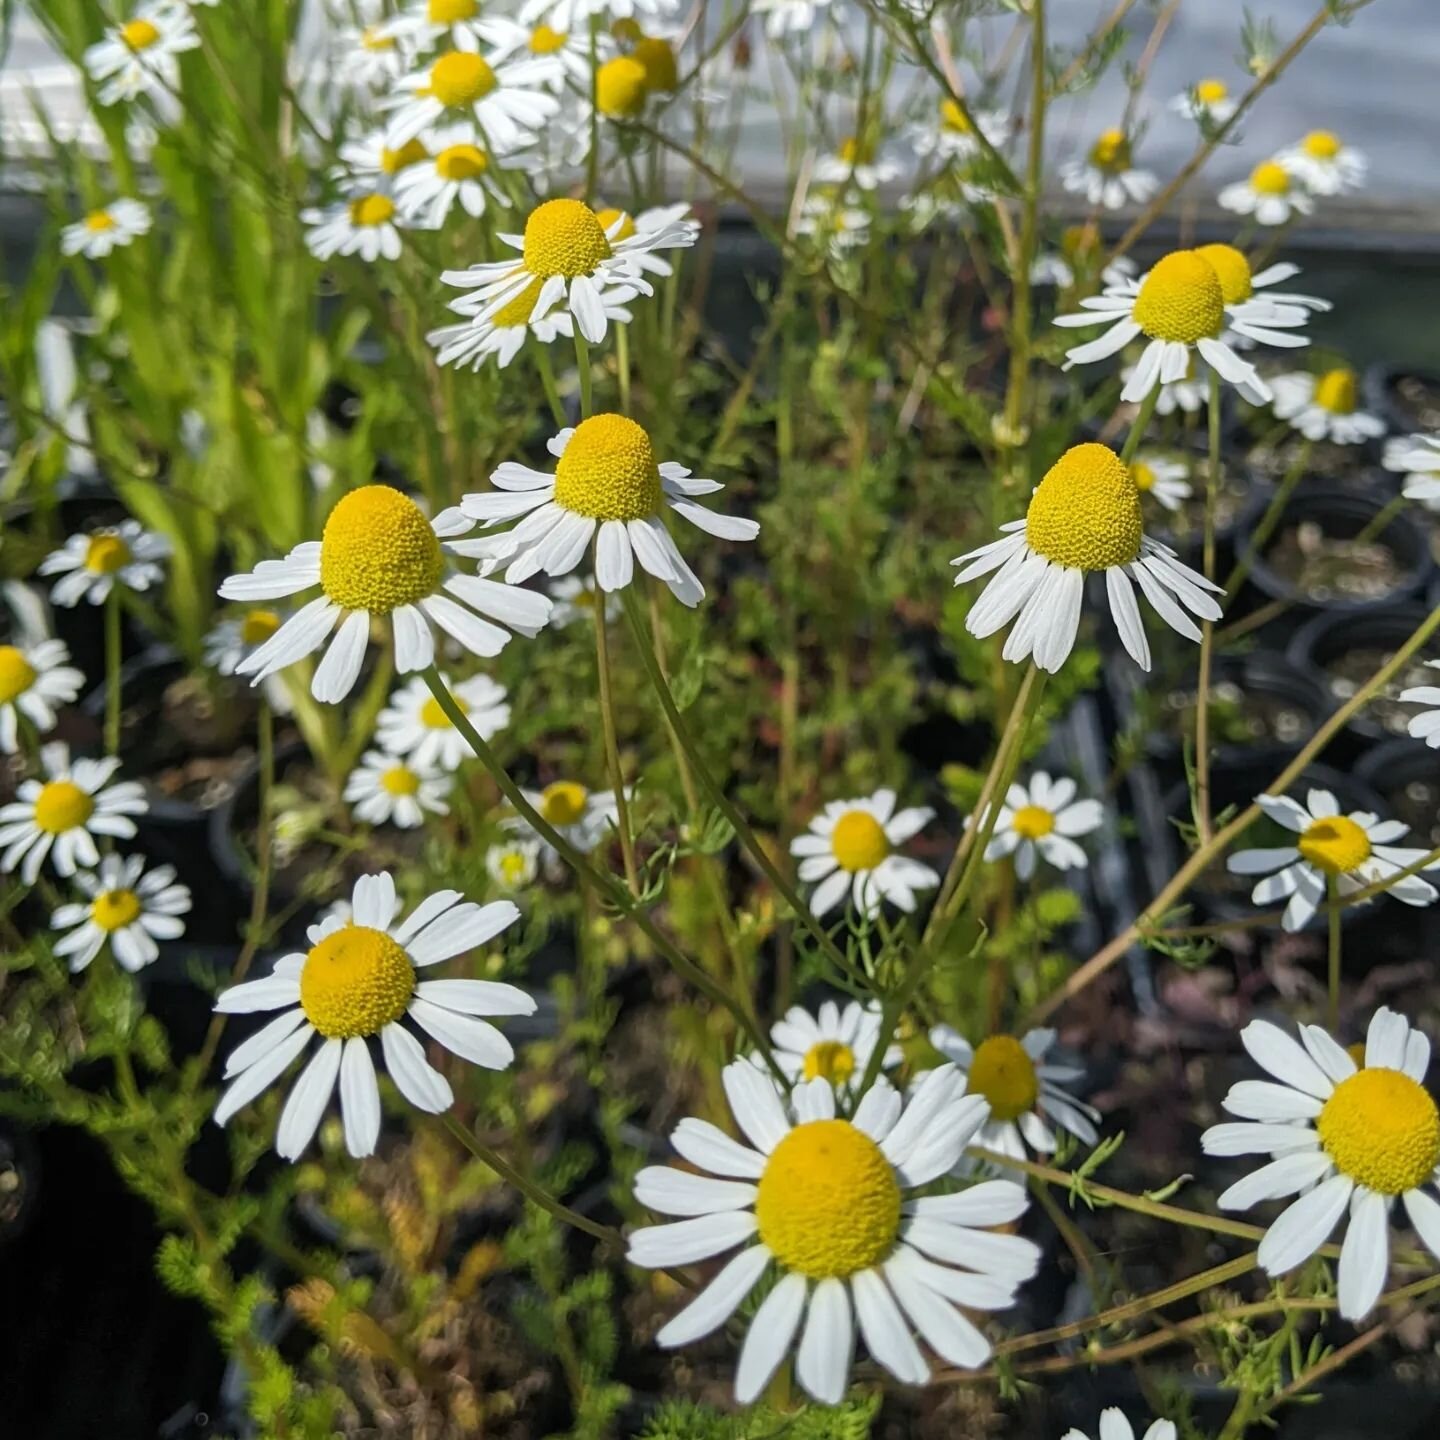 Chamomile attention flash! Finished products. These cardoons, and many native plants, perennials, medicinal and culinary herbs and flowers, will be for sale this Thursday at the Armory farmers market 3-7 PM. Also strawberries, bouquets, herbs, roots 